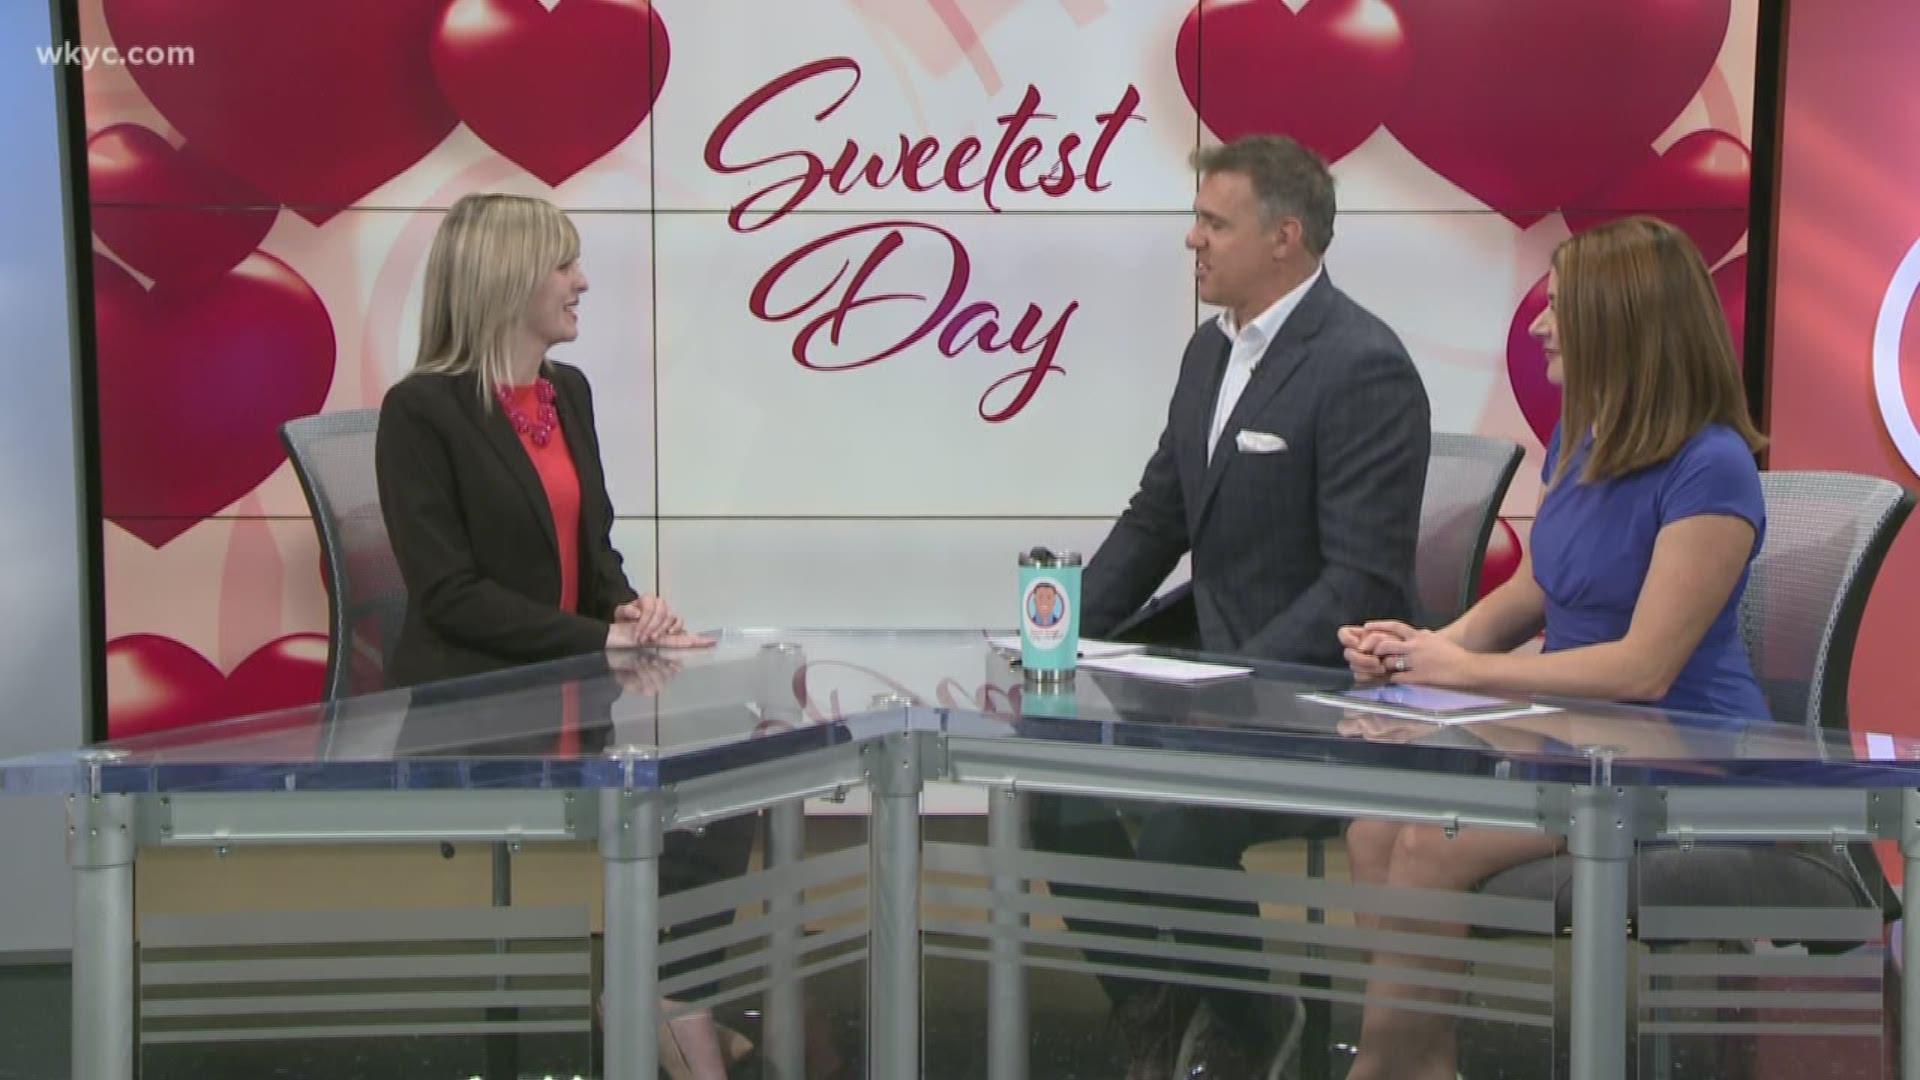 Destination Cleveland's Kristen Jantonio tells Jay Crawford and Maureen Kyle the best, easiest and cheapest ways to celebrate Sweetest Day on October 19.